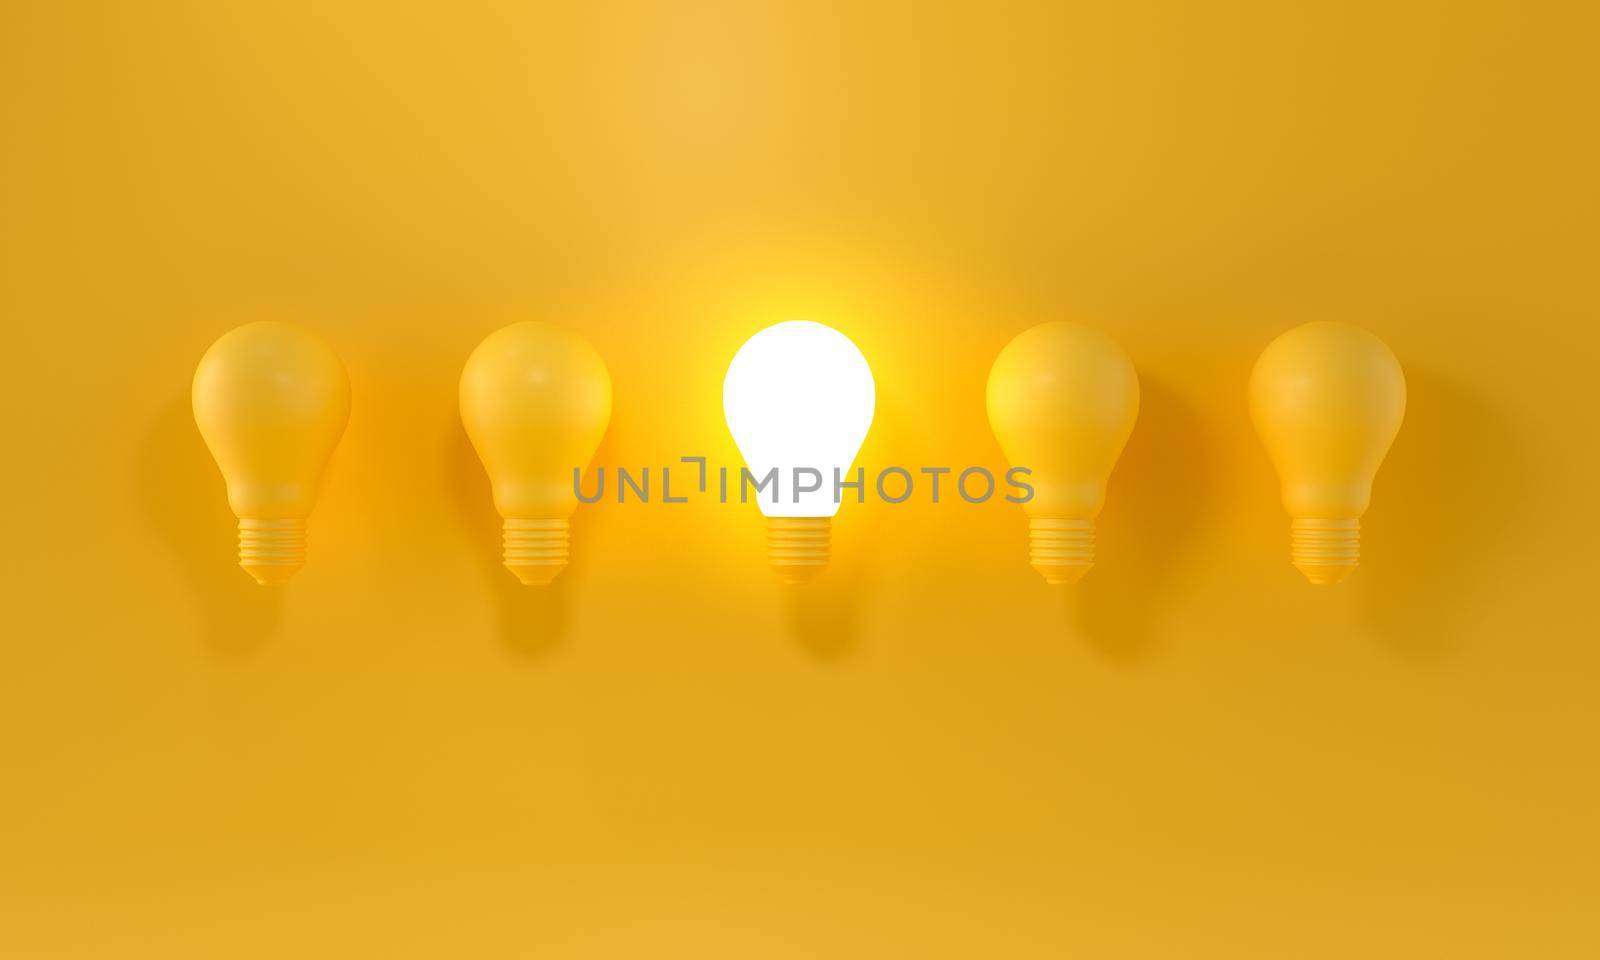 Glowing Light Bulb between the others on yellow light background. Leadership, innovation, great idea and individuality concepts. 3d rendering.